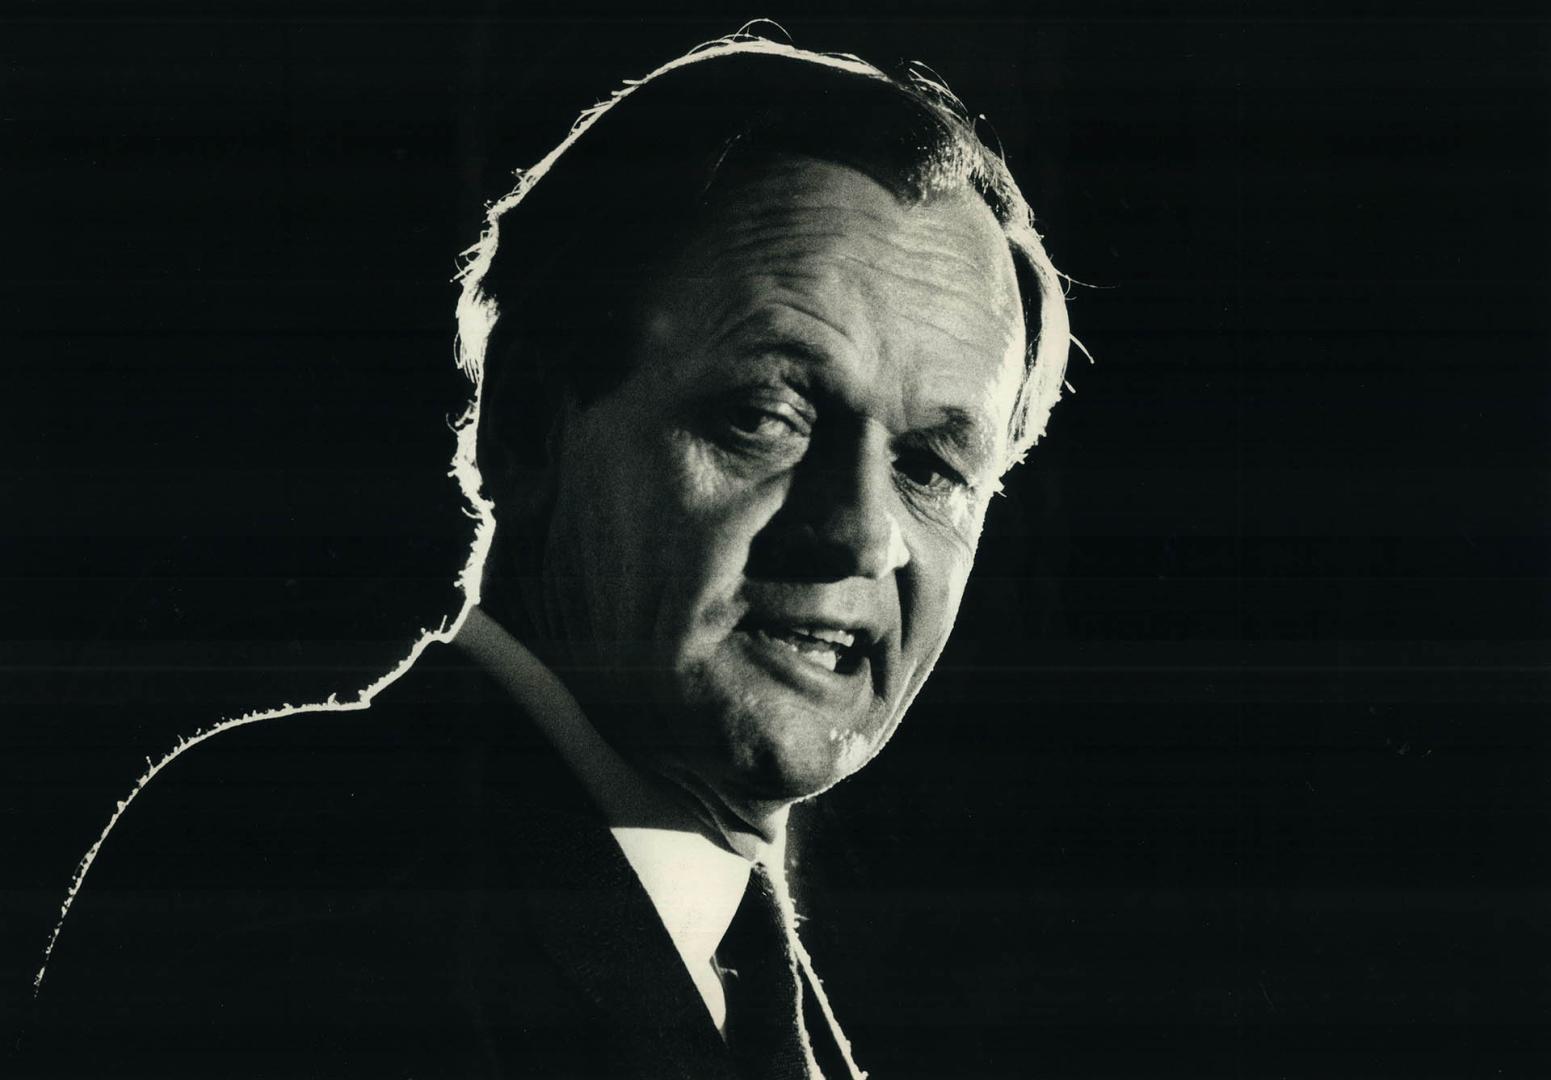 In the wings: Jean Chretien, who won the heart of the party but lost the federal Liberal leadership to John Turner, may be the frontrunner to succeed him if public criticism persuades him to quit